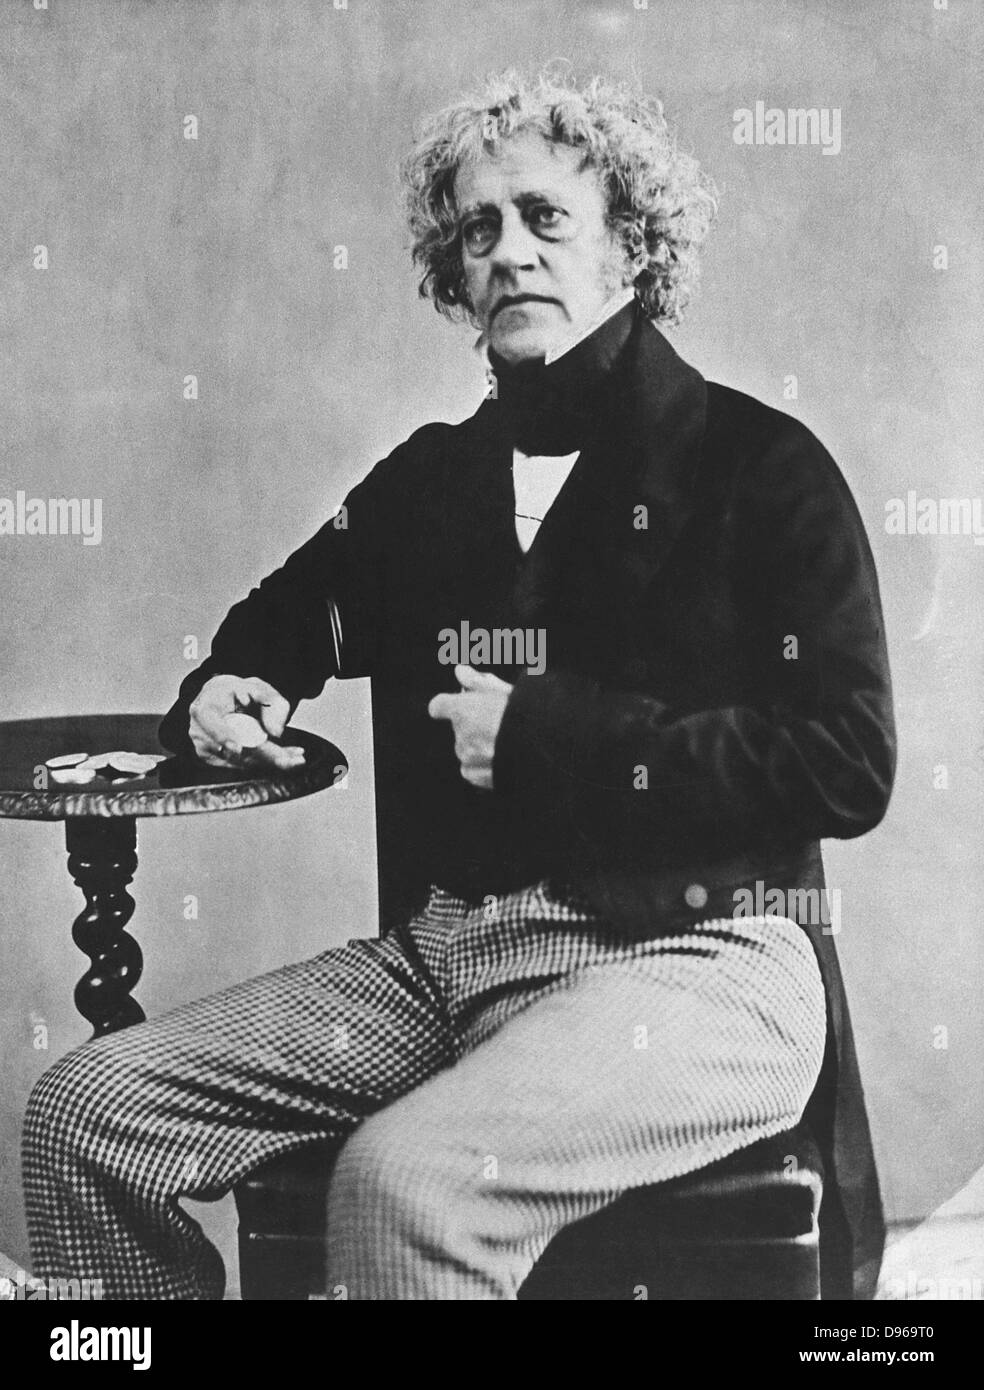 John Frederick Herschel (1792-1871) English astronomer and scientist, from photograph when Master of the Mint (1850-1855) showing him holding a florin (2 shilling piece) which was being introduced with the idea of decimalization of the coinage. Stock Photo